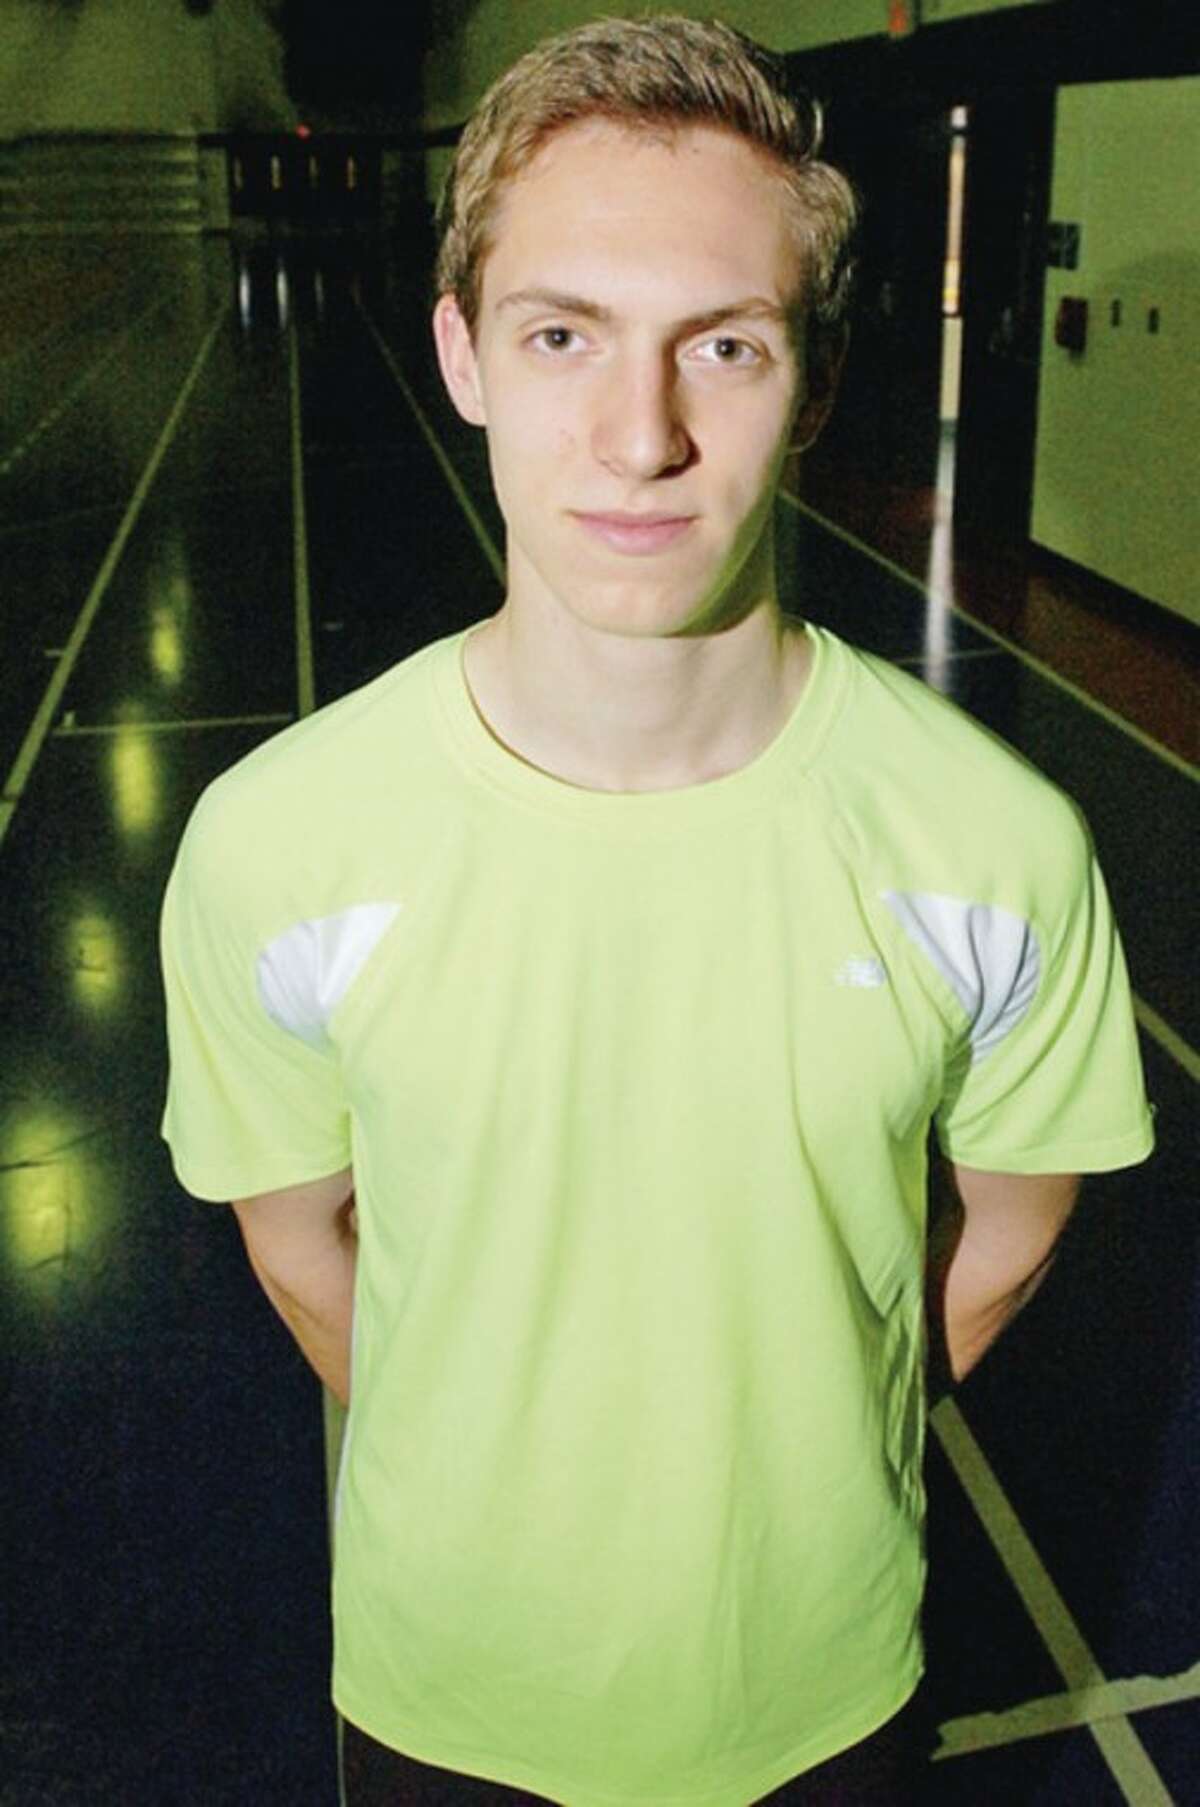 Hour photo/Erik Trautmann Staples High track standout Henry Wynne has been selected as the MVP of The Hour's All-Area boys indoor track team.